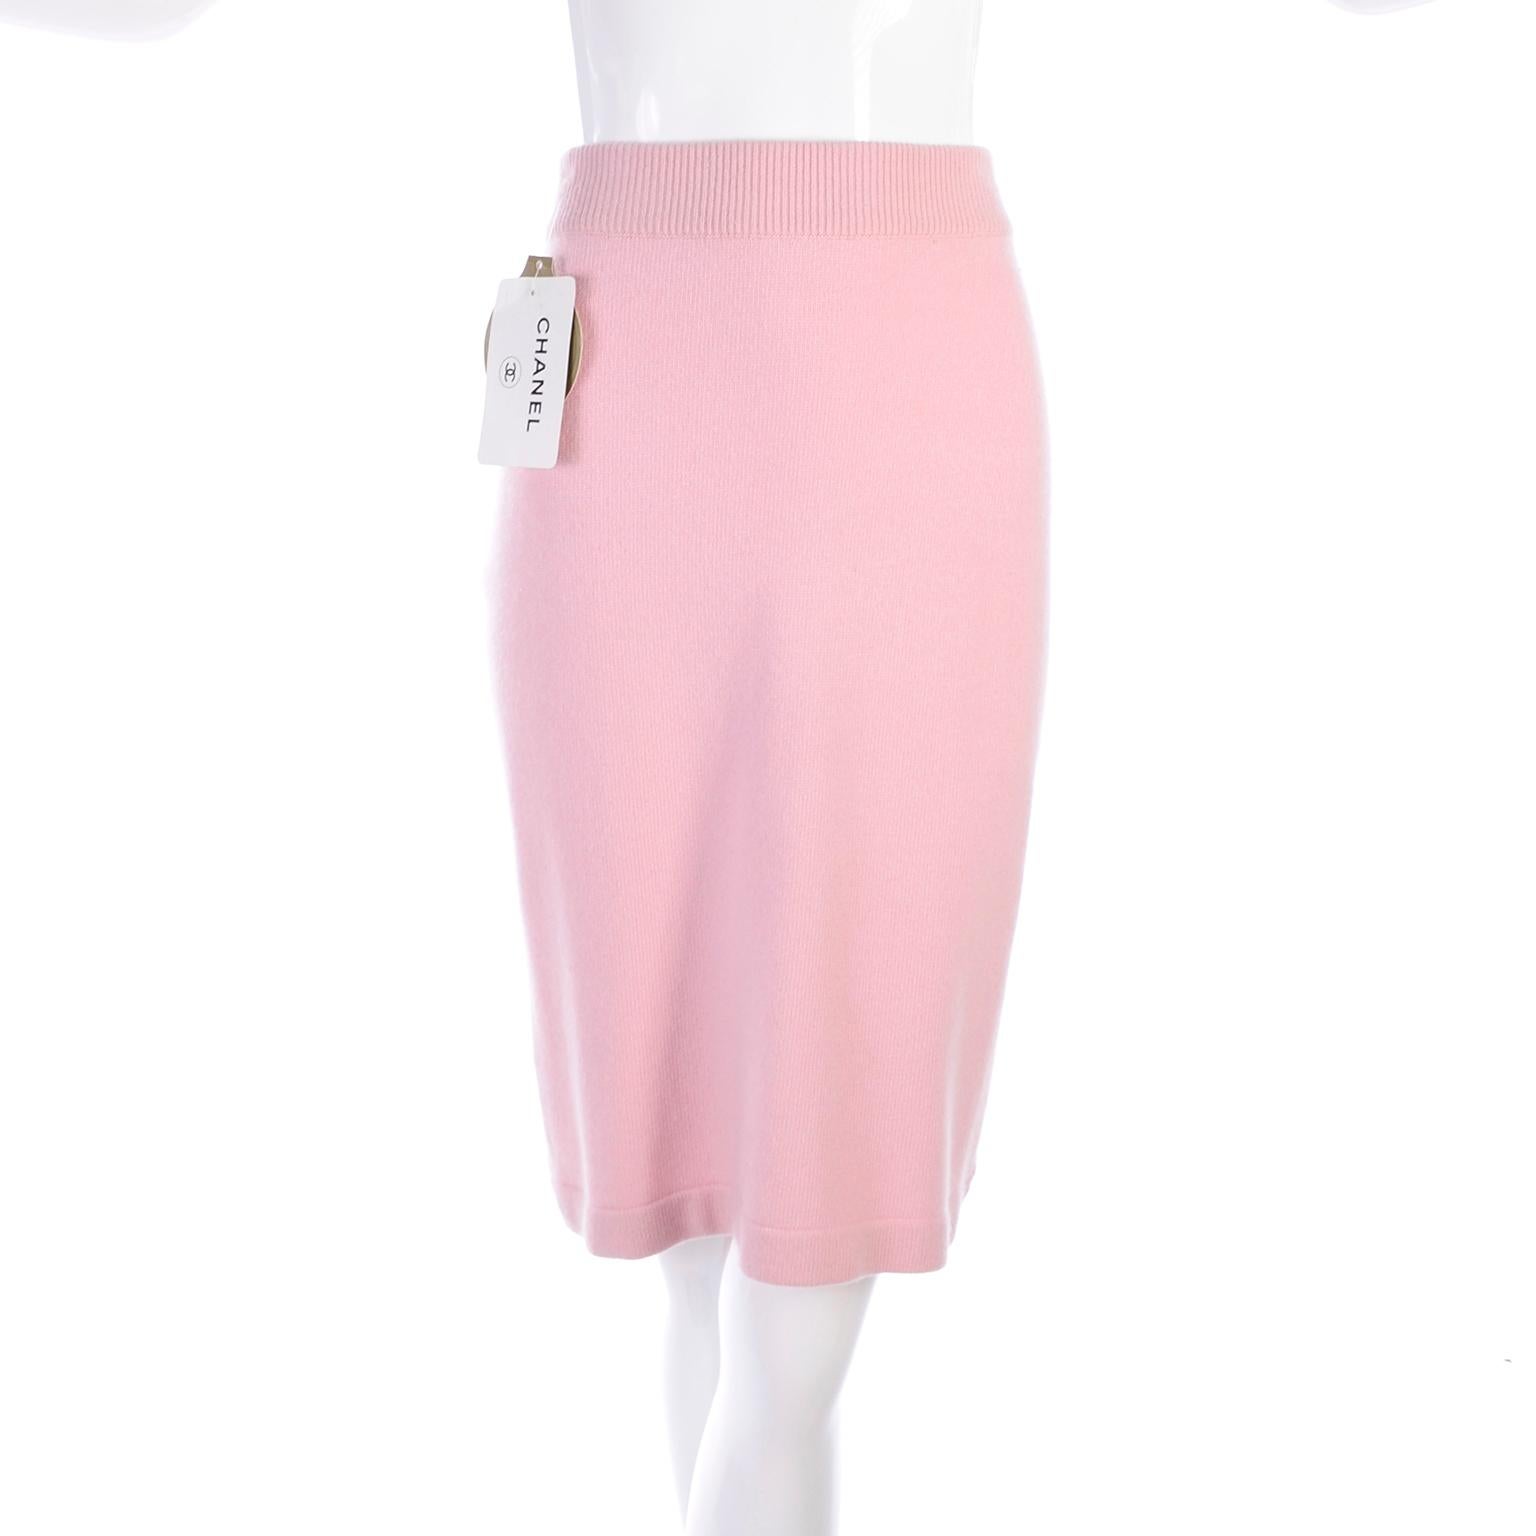 1988 Chanel Runway Vintage Pink Cashmere Skirt & Sweater Top 2 pc W/Tag 2